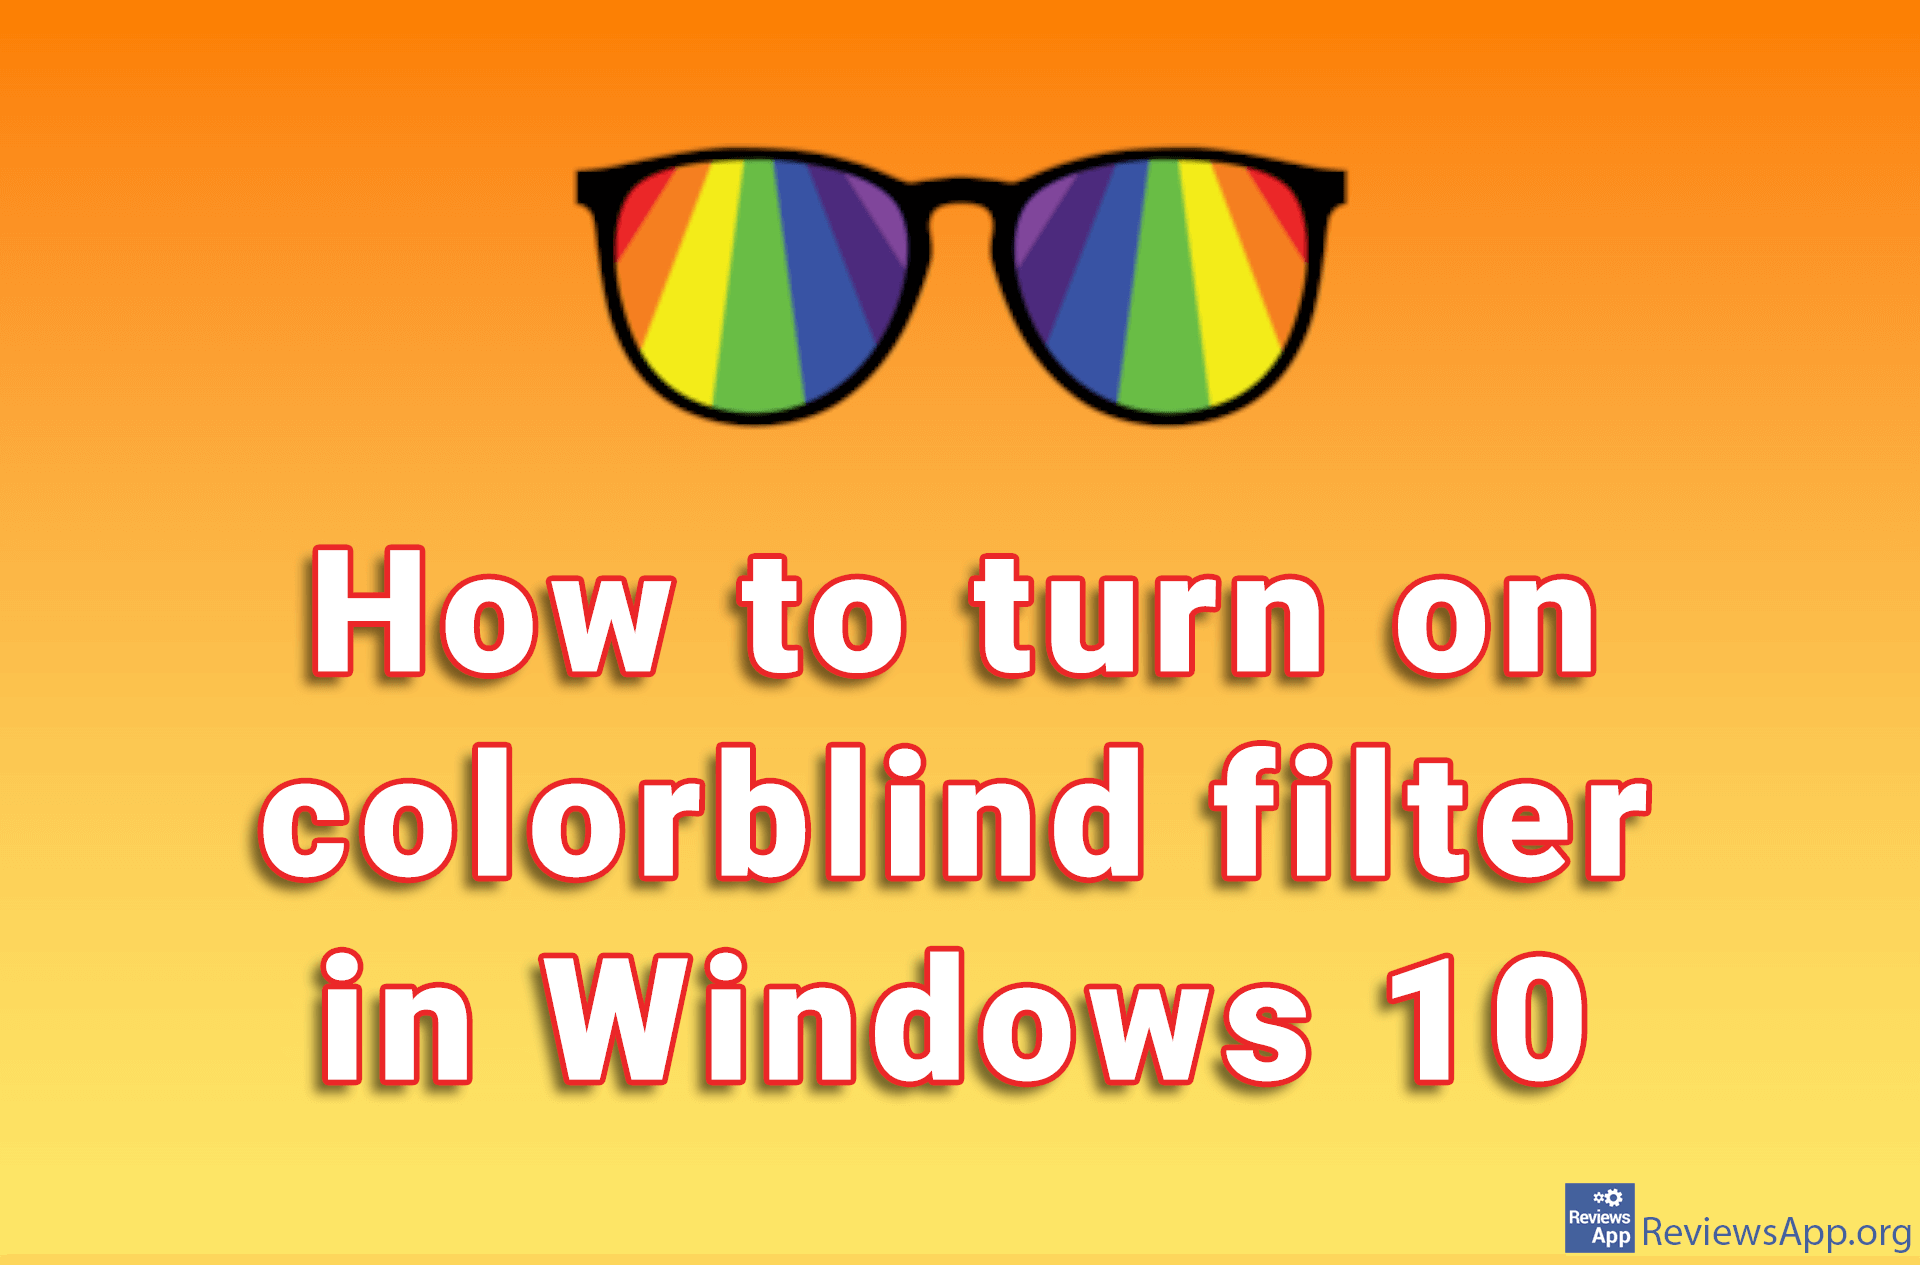 How to turn on colorblind filter in Windows 10